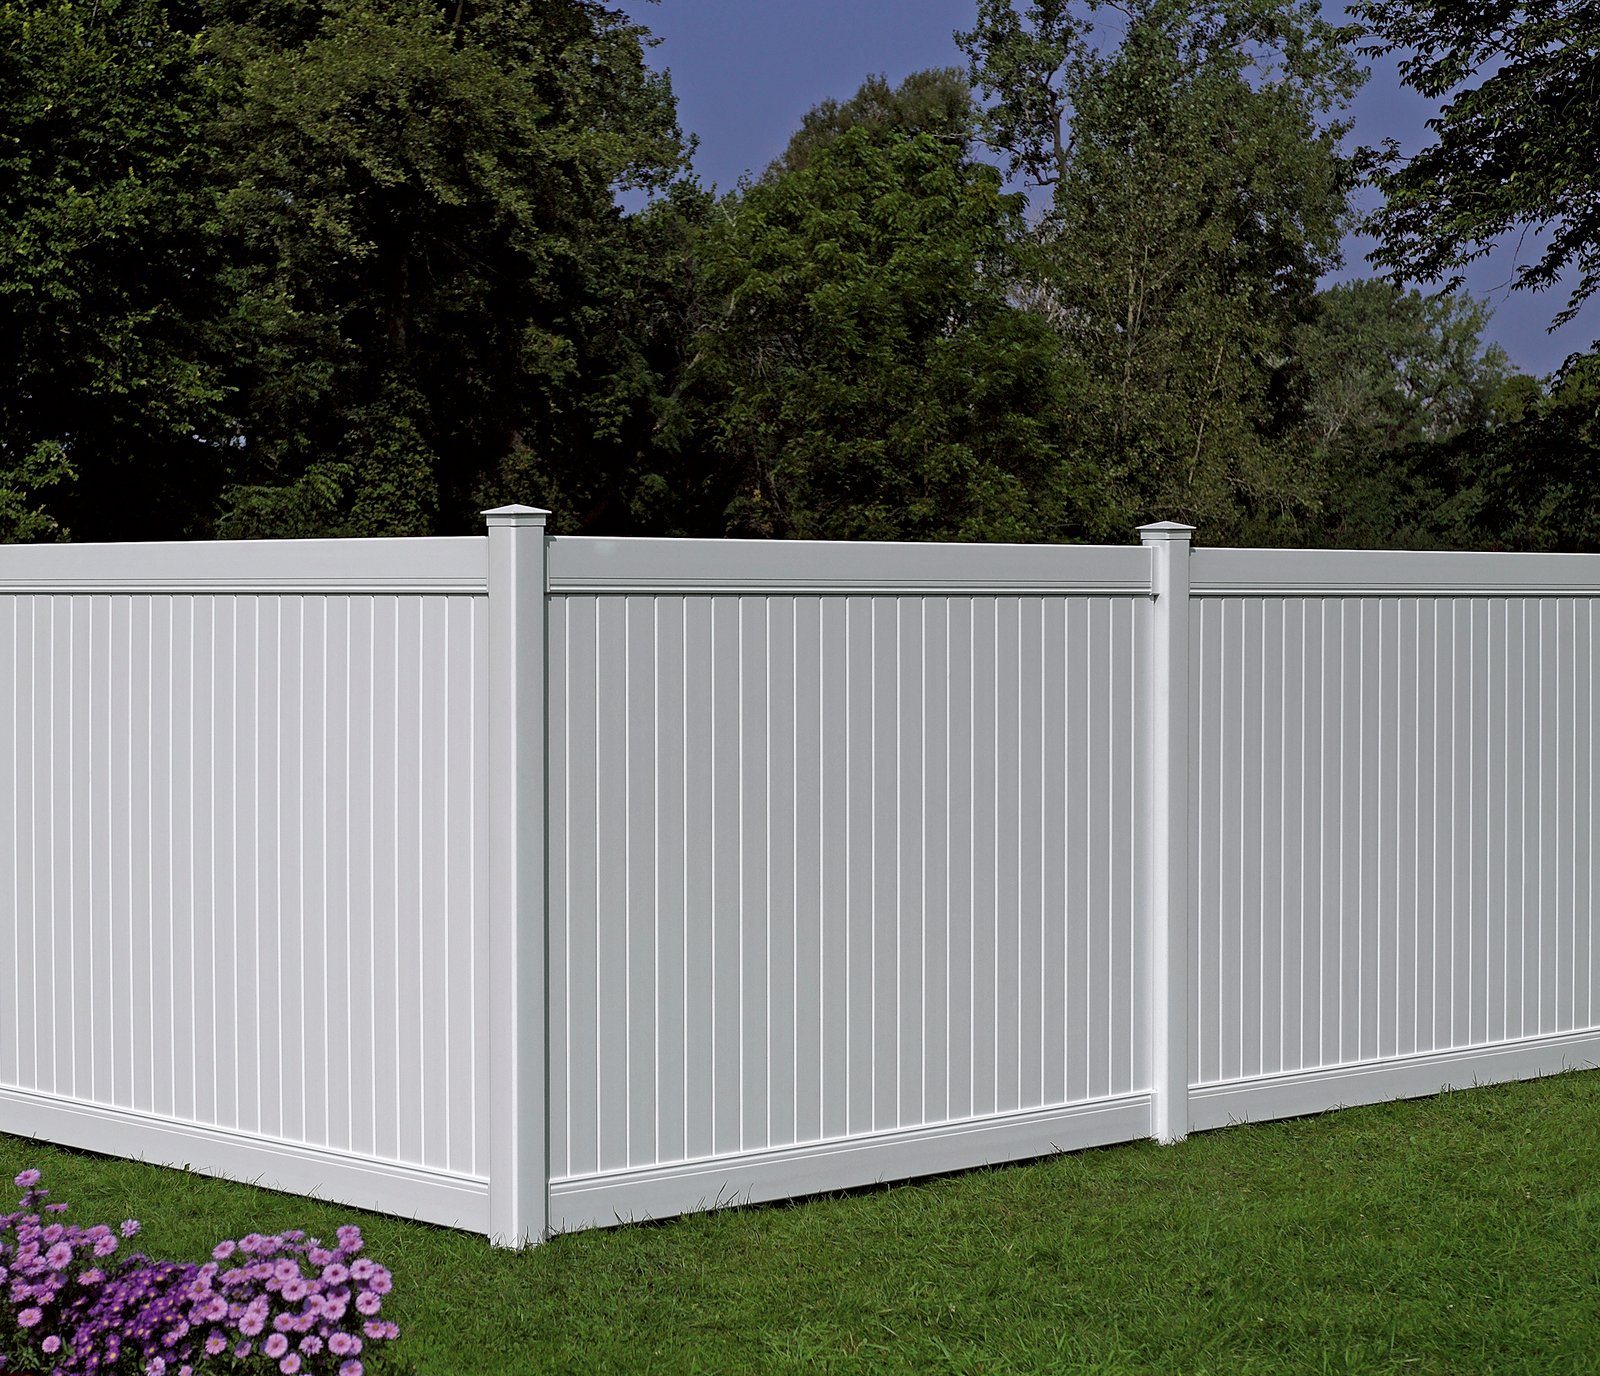 The Longevity of PVC Fencing: How it withstands The Test of Time